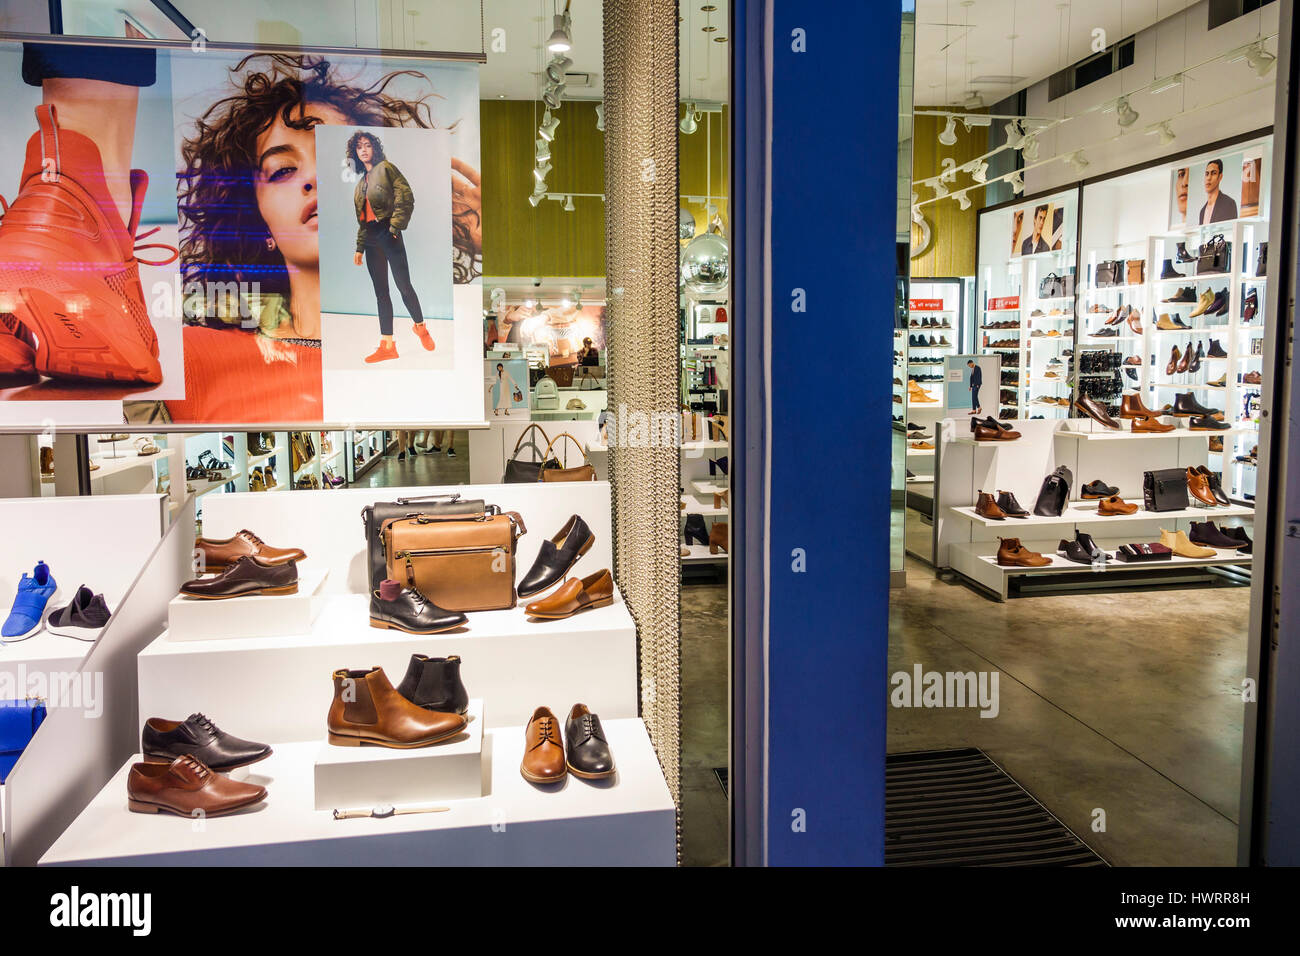 Aldo High Resolution Stock Photography and Images - Alamy